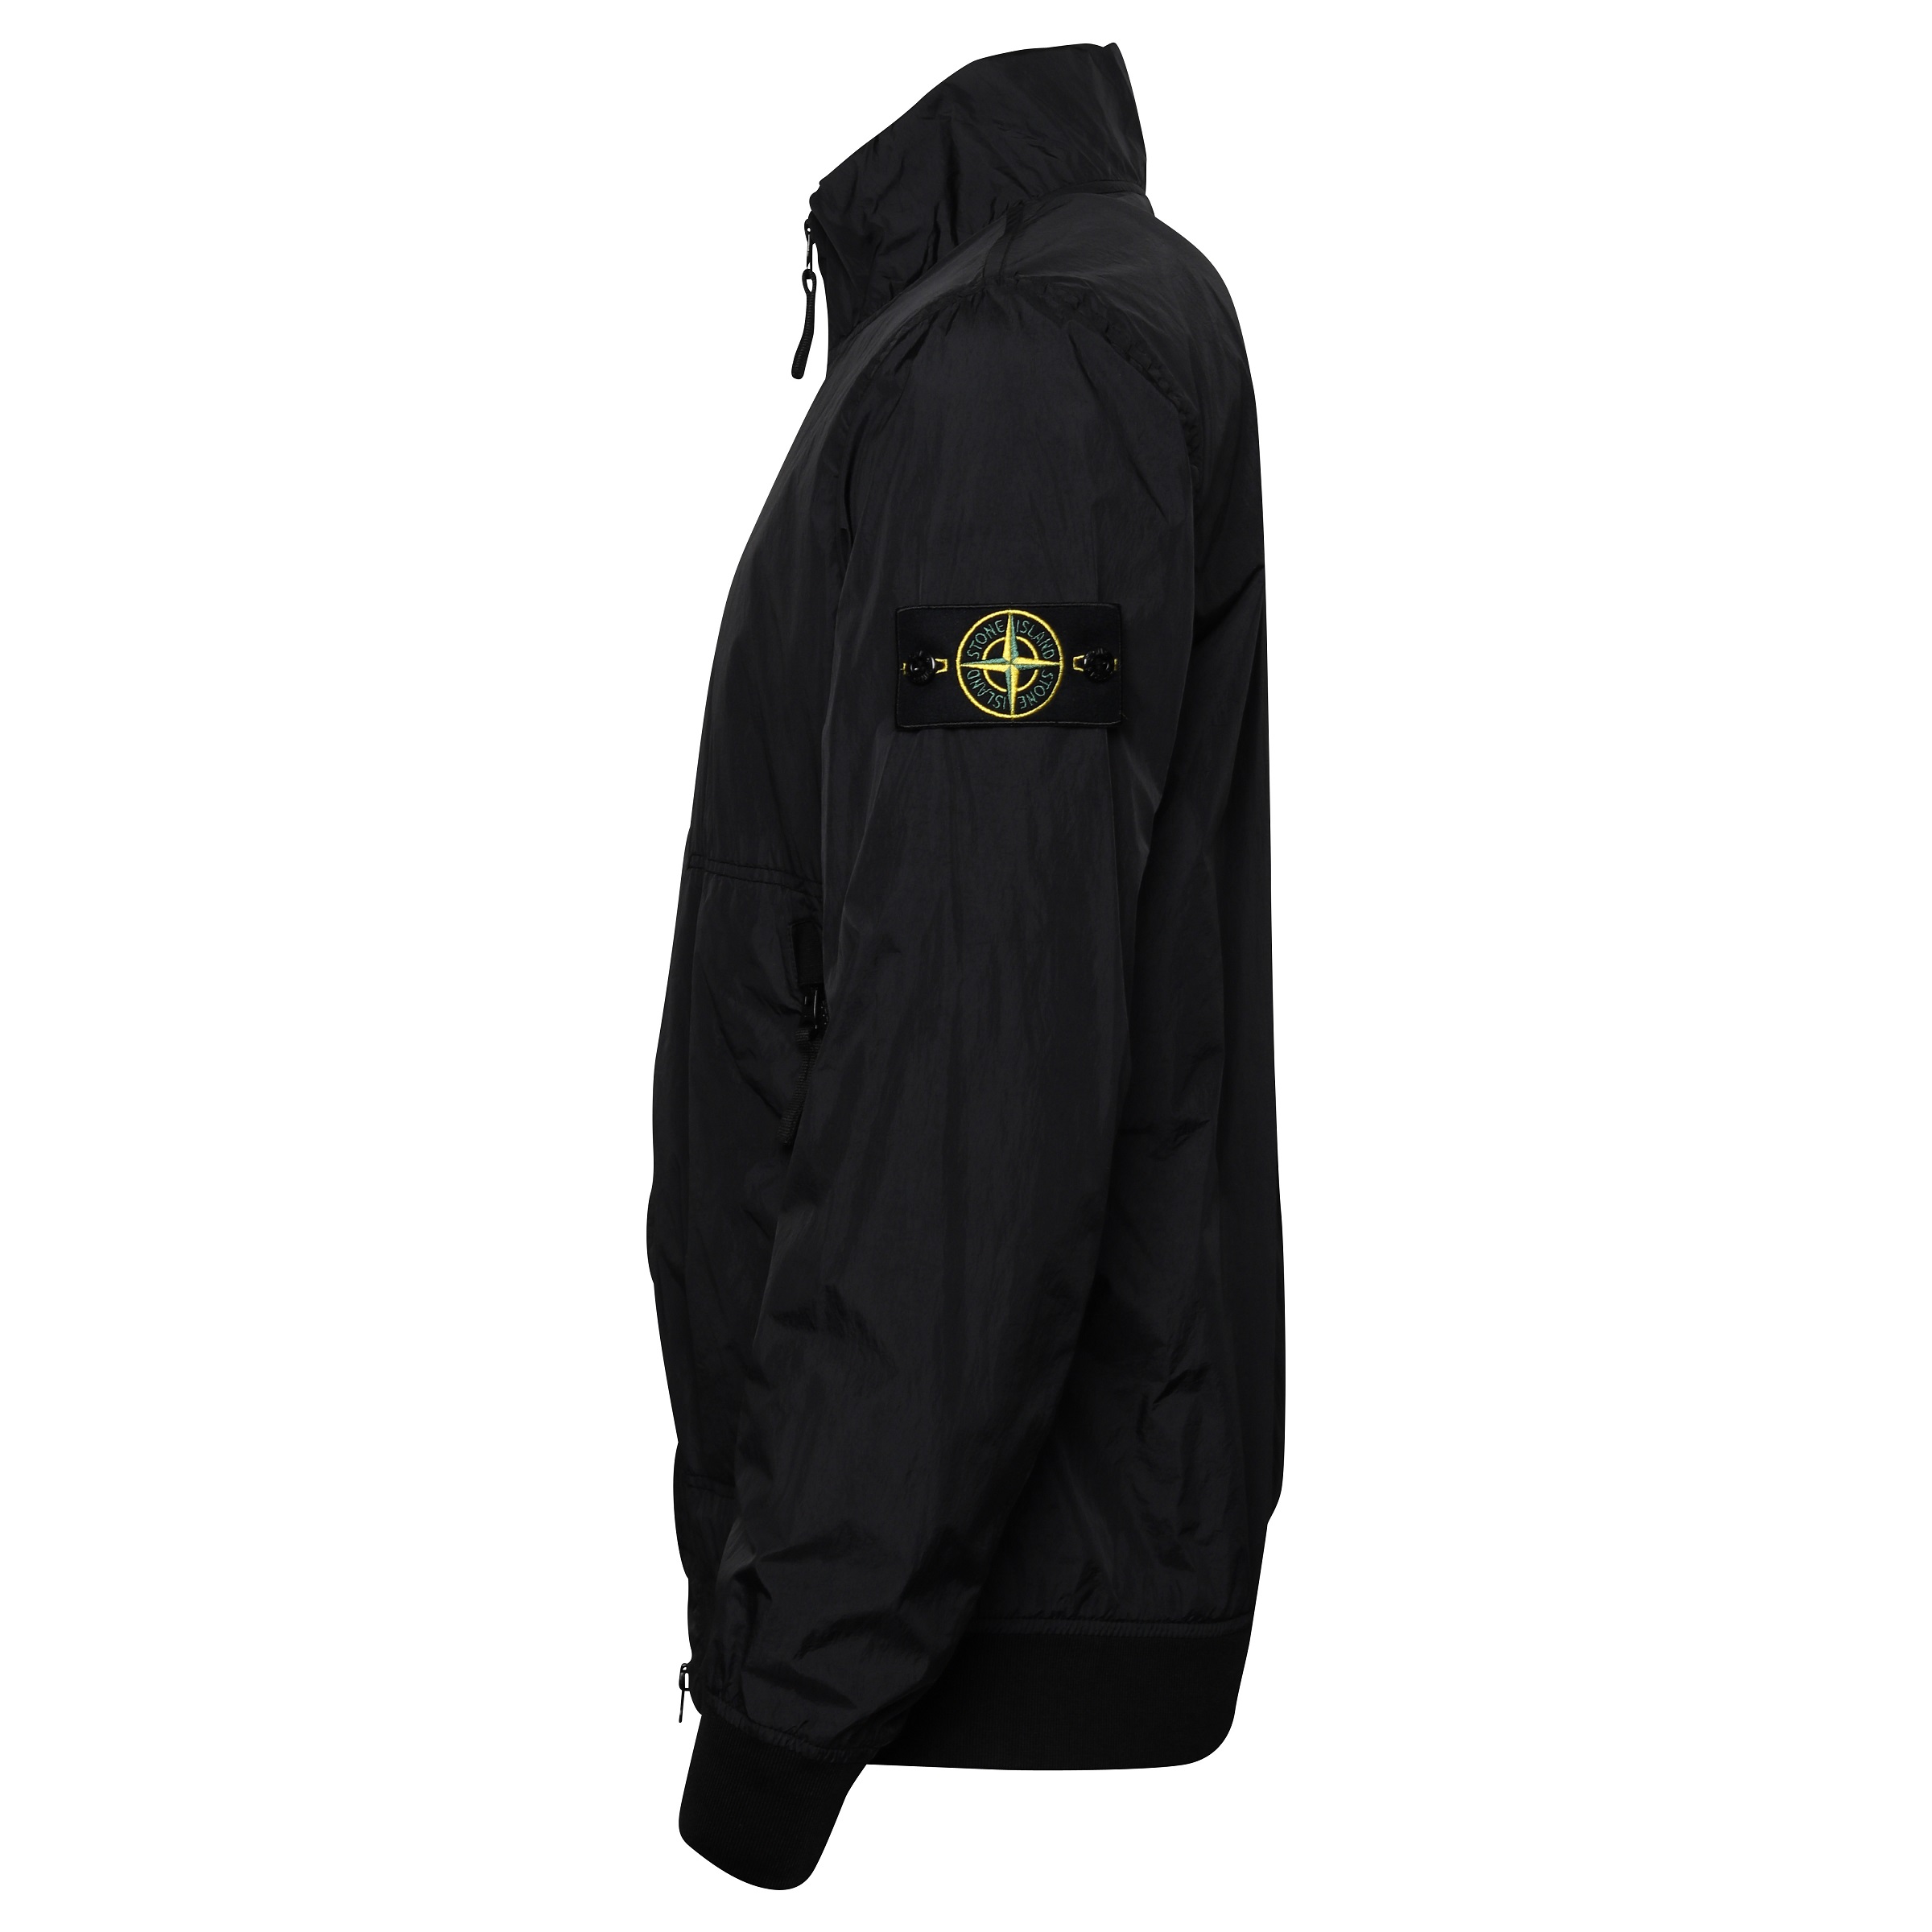 Stone Island Garment Dyed Crinkle Reps Light Jacket in Black 3XL